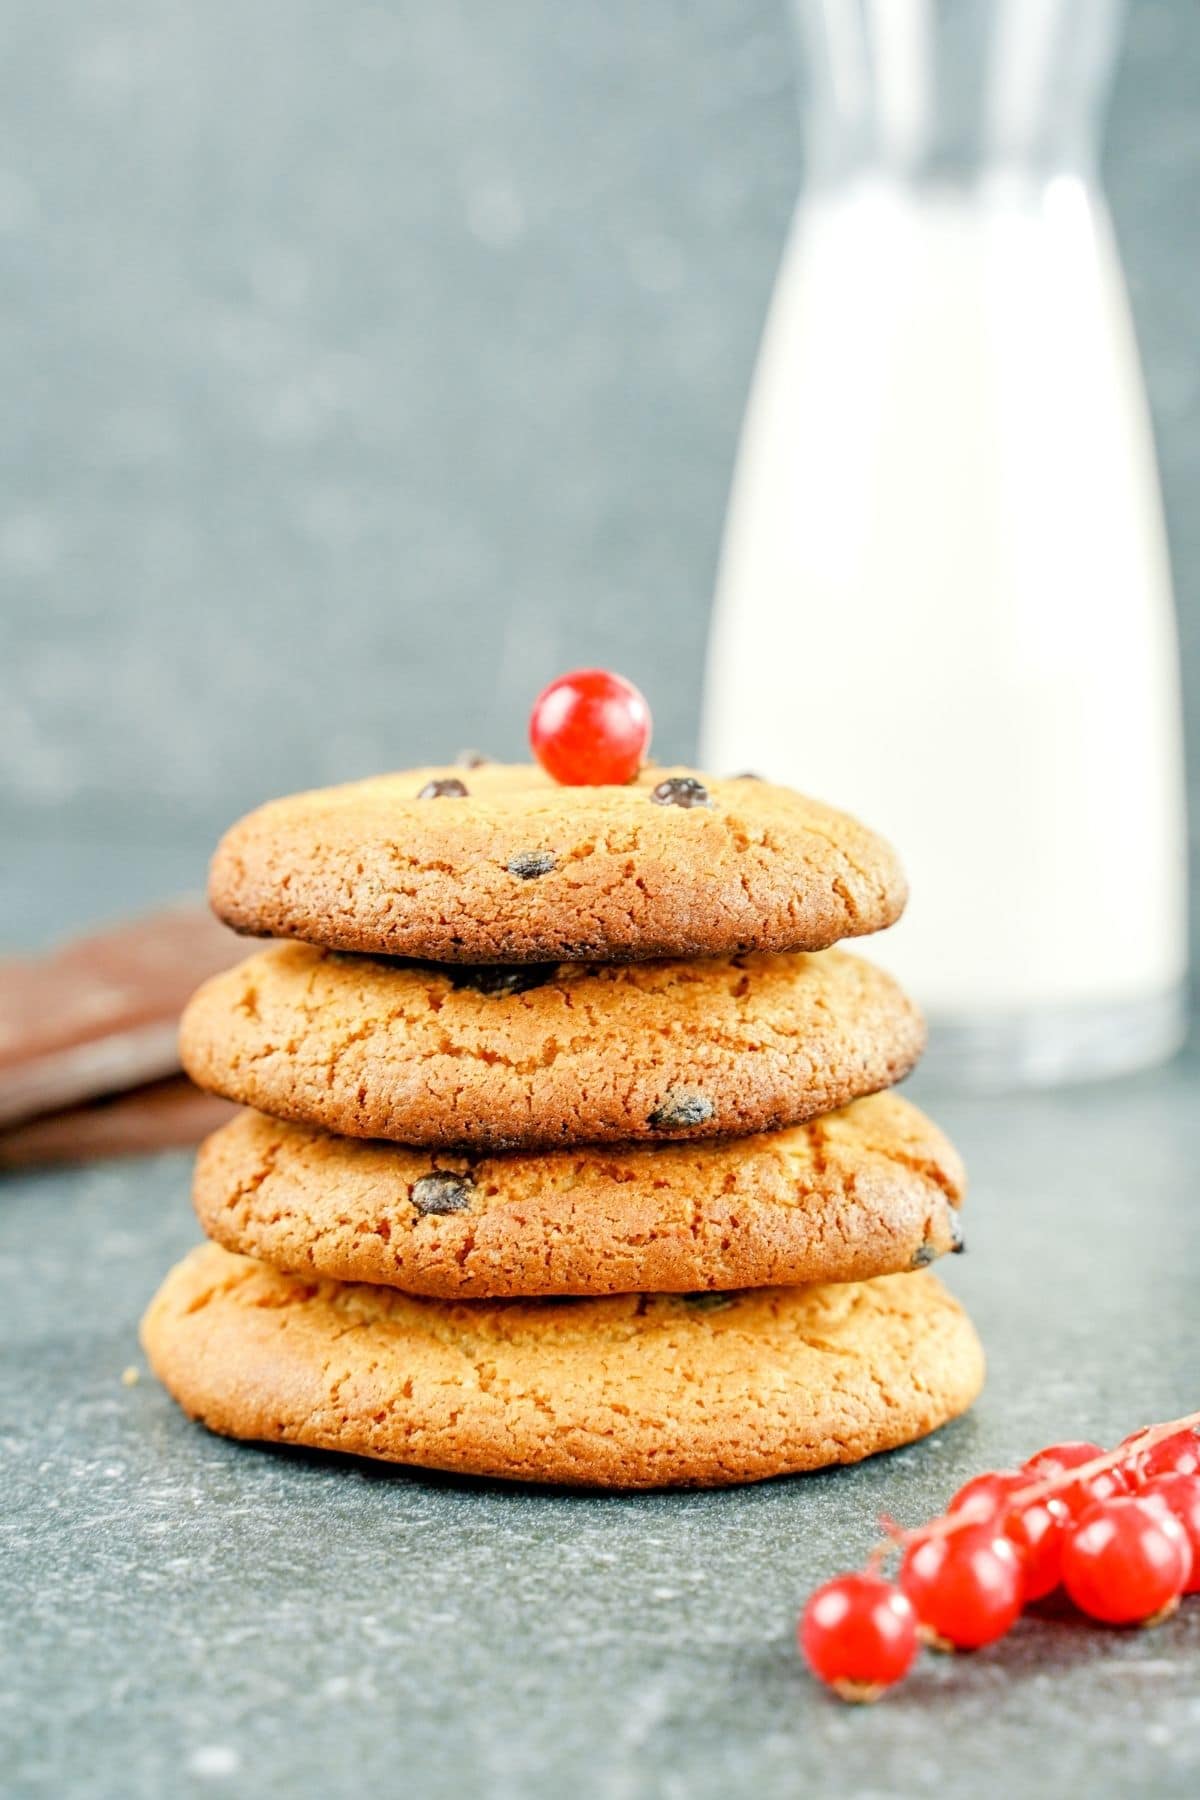 four cookies stacked with berry on top and bottle of milk in the background